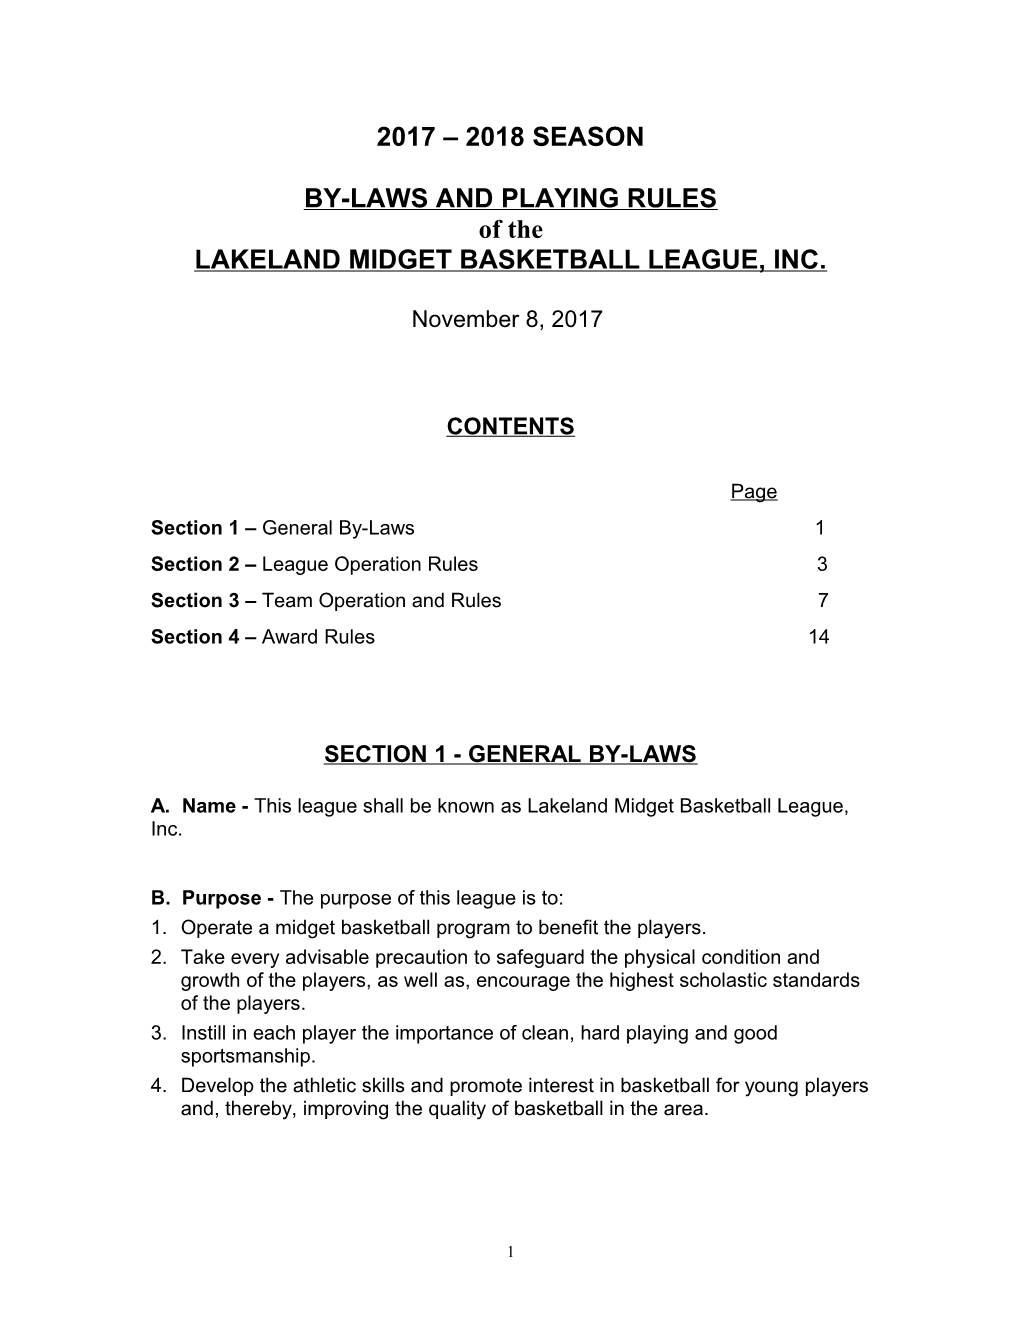 By-Laws and Playing Rules